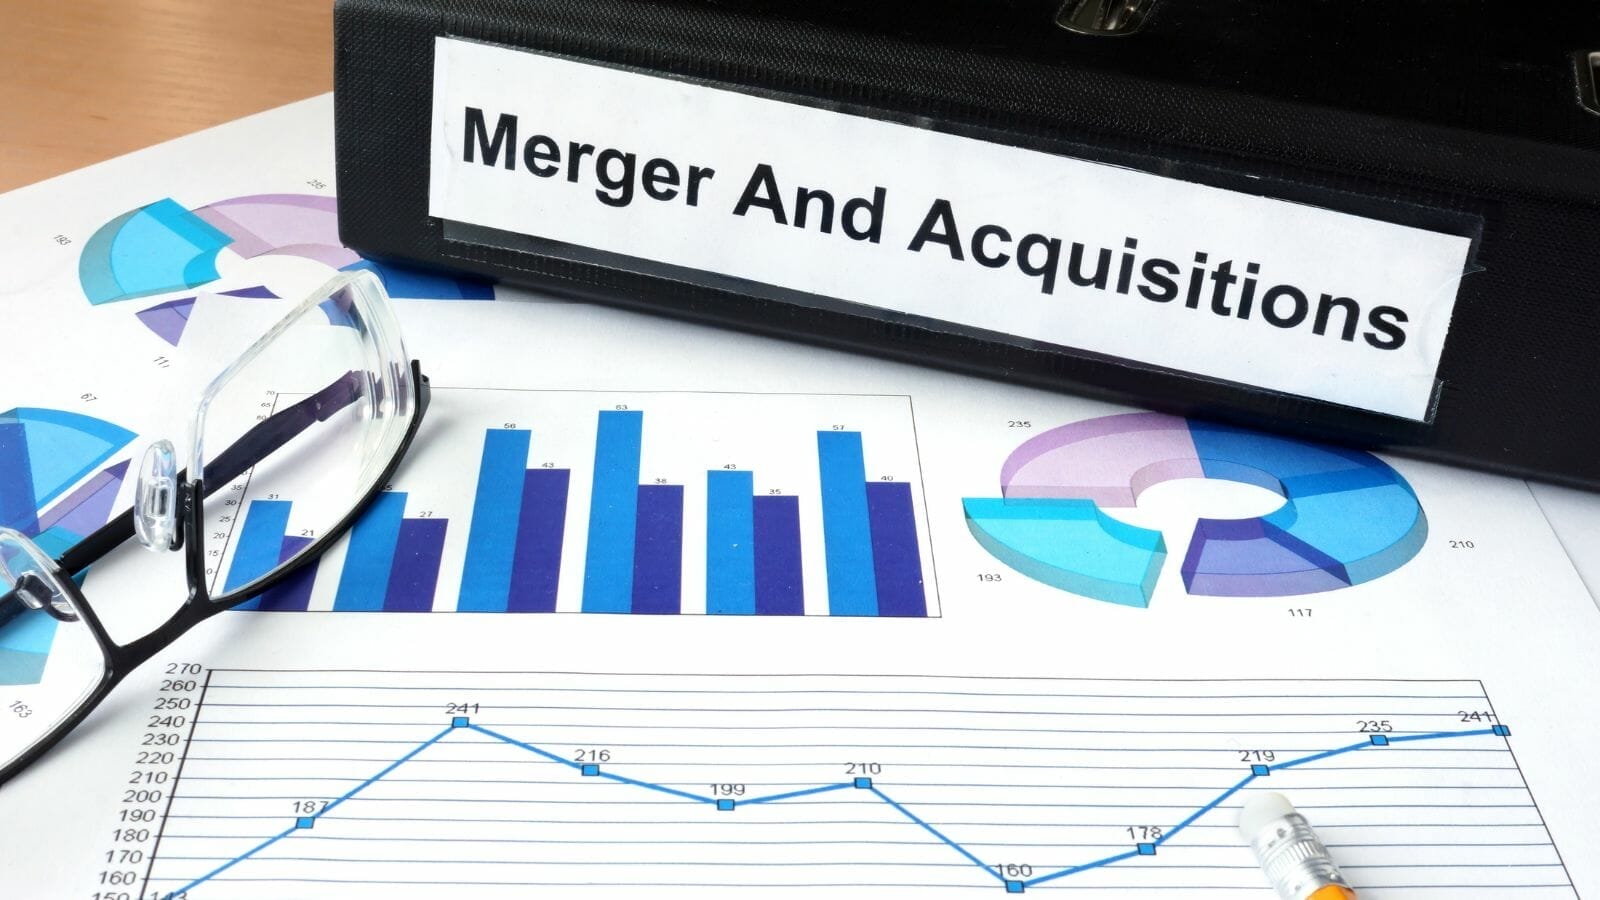 A close-up of a folder merger and aquisitions

